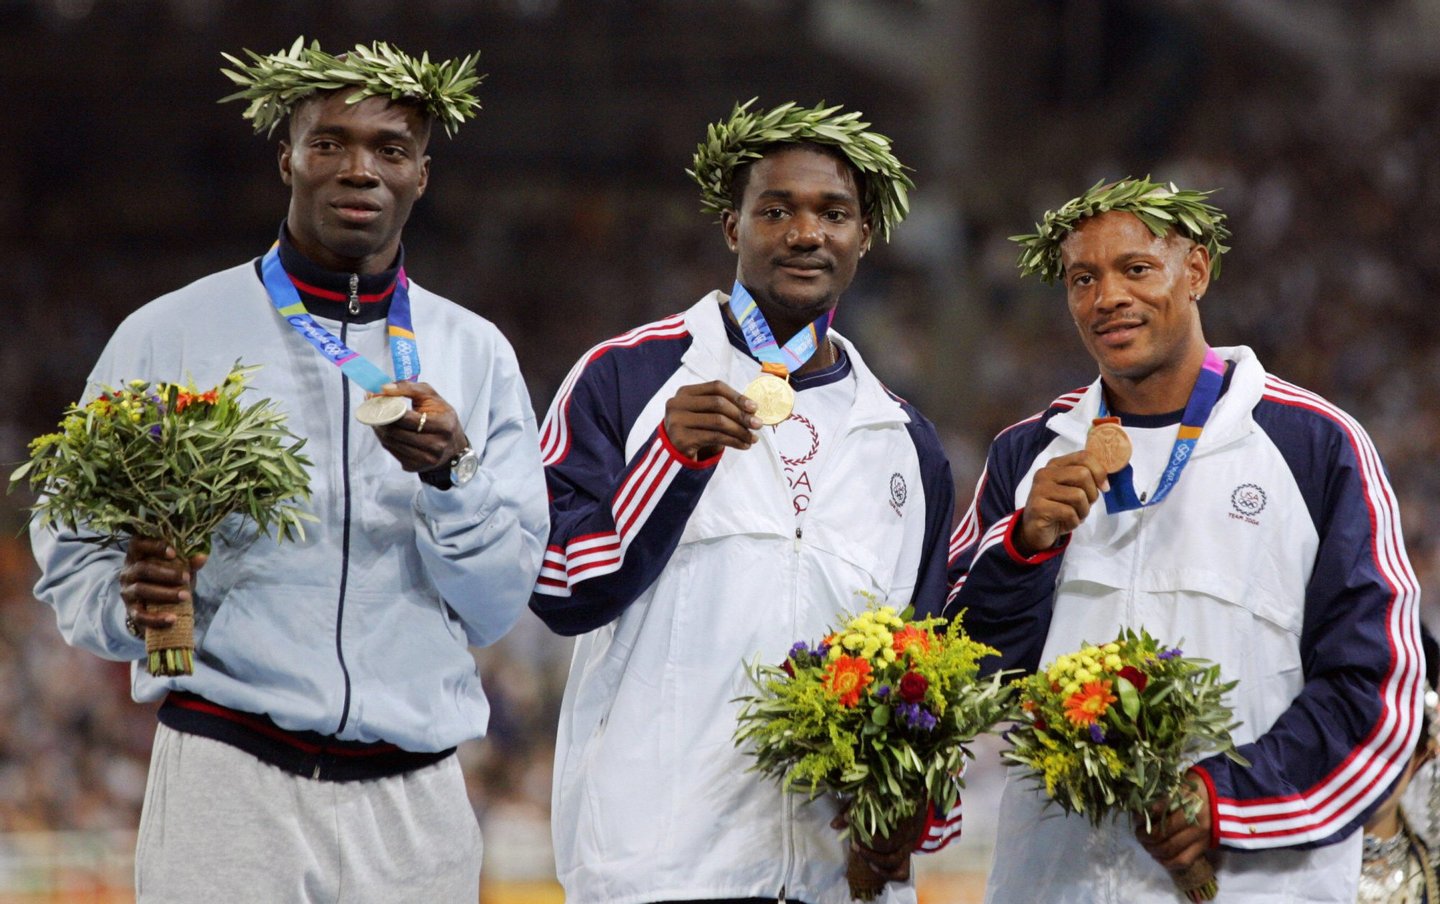 ATHENS, Greece: Men's 100m gold medal winner Justin Gatlin of the USA (C), silver winner Francis Obikwelu of Portugal (L), and bronze winner Maurice Greene of the USA stand on the winners' podium, 23 August 2004, during the Olympic Games athletics competitions at the Olympic Stadium in Athens. AFP PHOTO/TOSHIFUMI KITAMURA (Photo credit should read TOSHIFUMI KITAMURA/AFP/Getty Images)